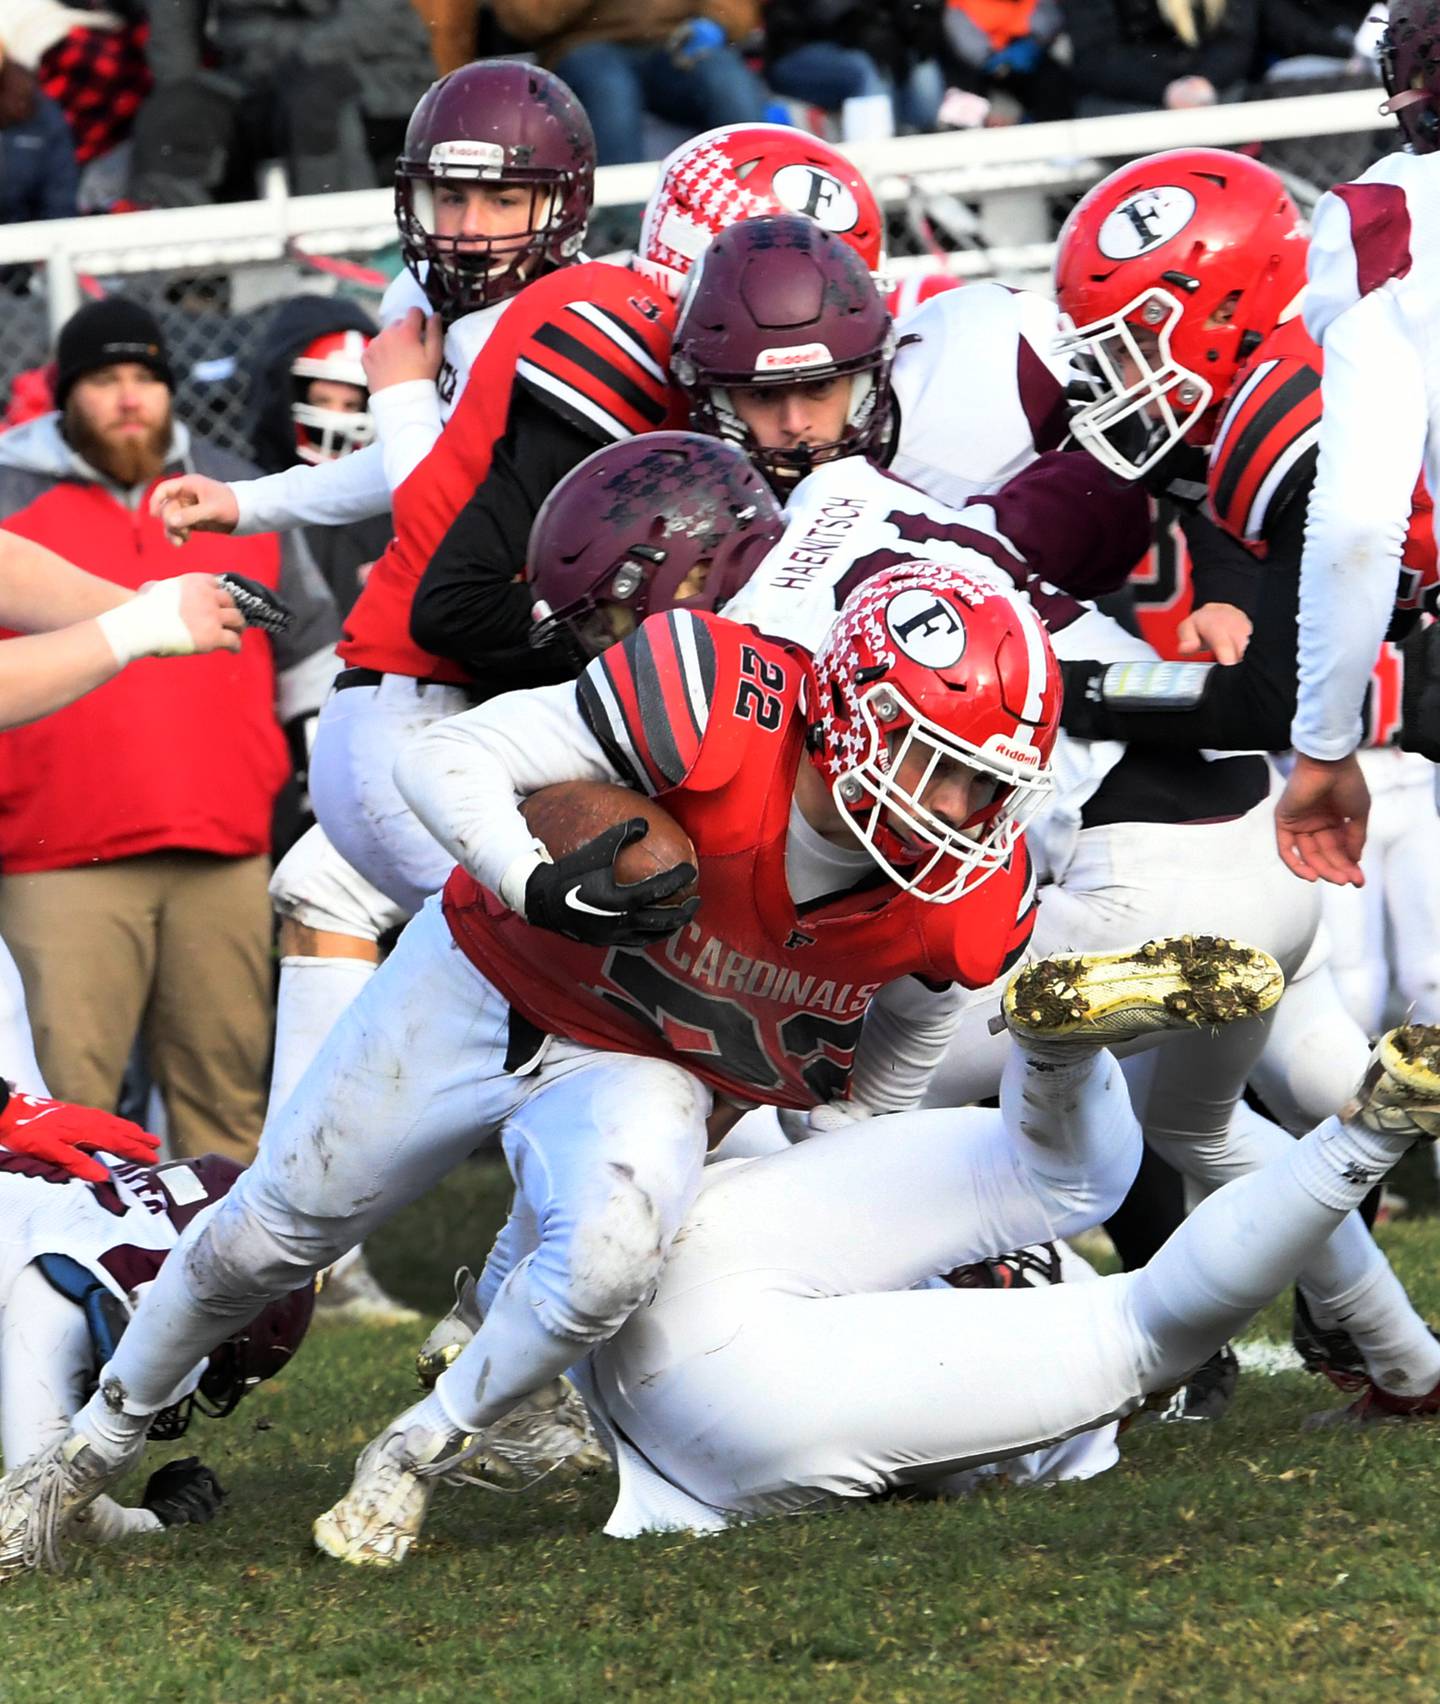 Forreston's Kaleb Sanders (22) fights for yards against Dakota in 1A playoff action on Saturday, Nov. 12.